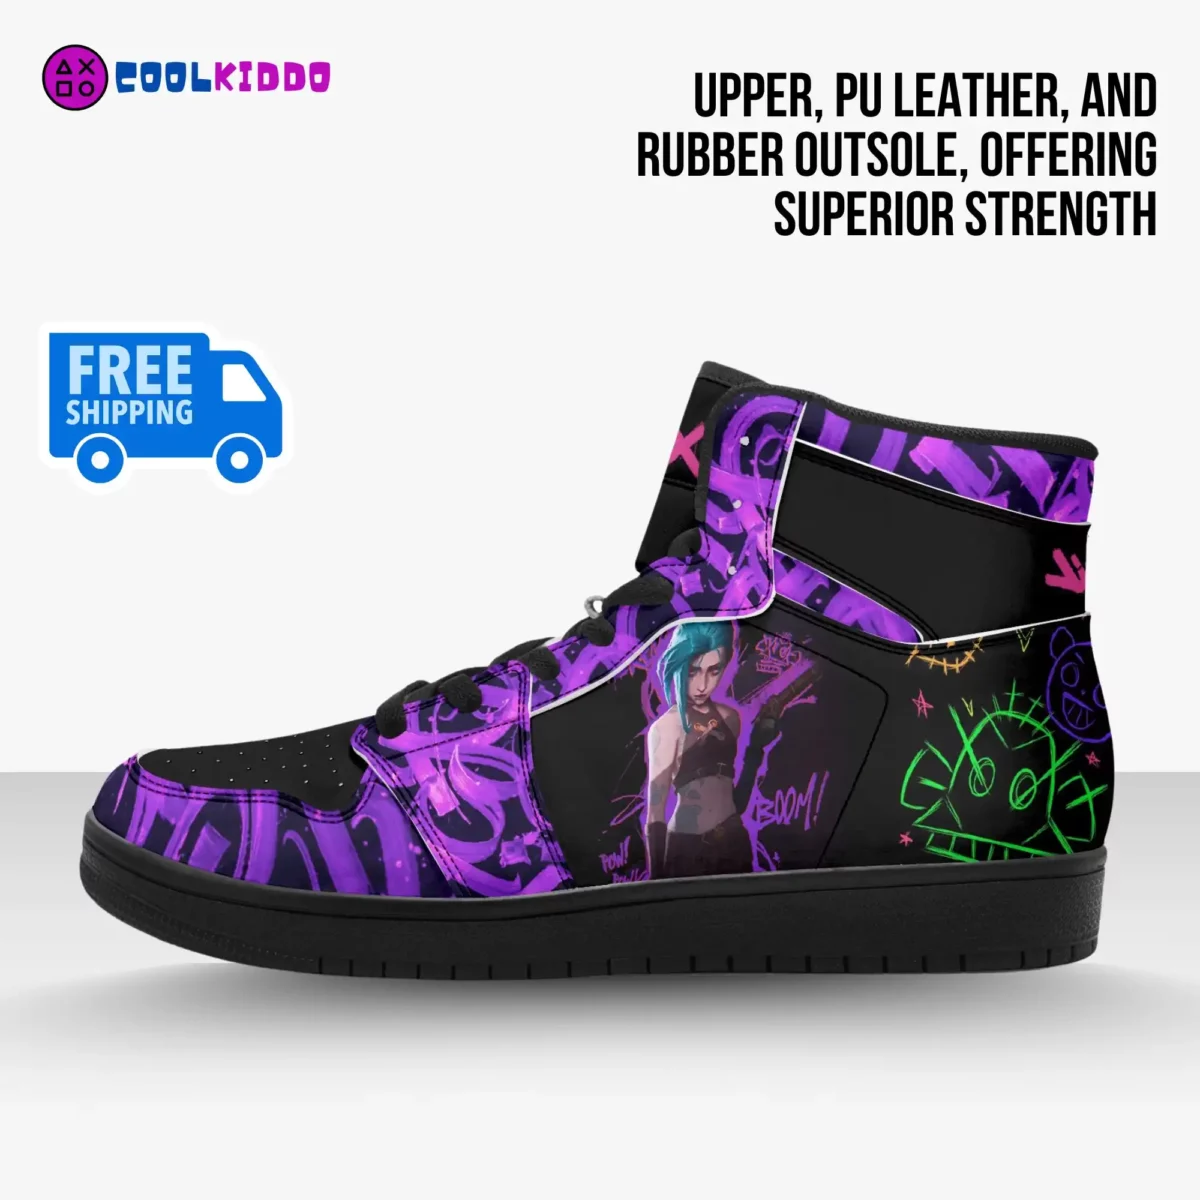 Jinx Character from ARCANE LoL High-Top Leather Sneakers, Unisex Casual Shoes for any season Cool Kiddo 12